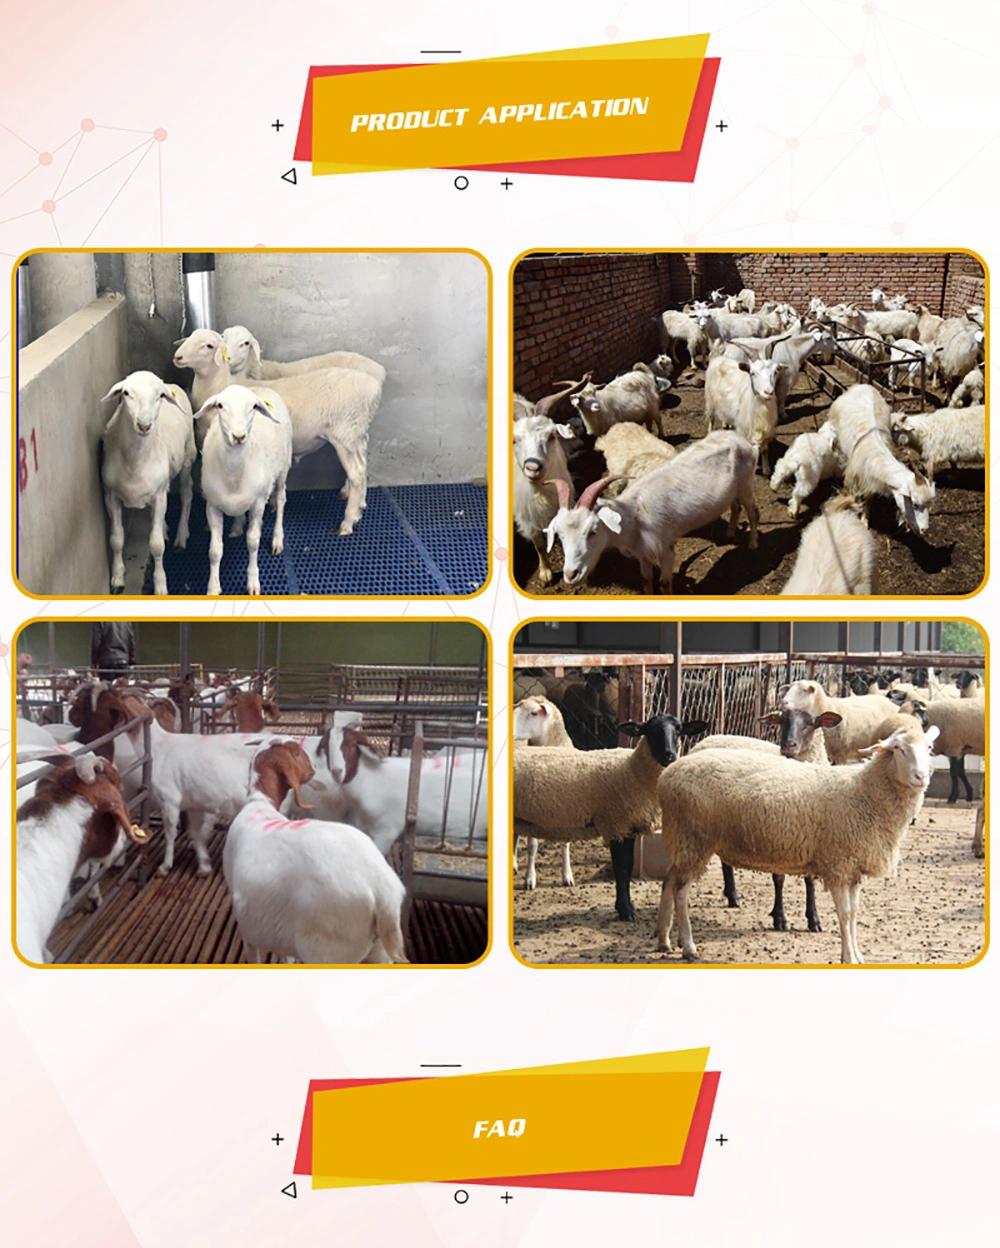 China-Made Agricultural Equipment Hot-DIP Galvanized Fence, Yard Fence, Cattle and Horse Fence, Panel Sheep Fence